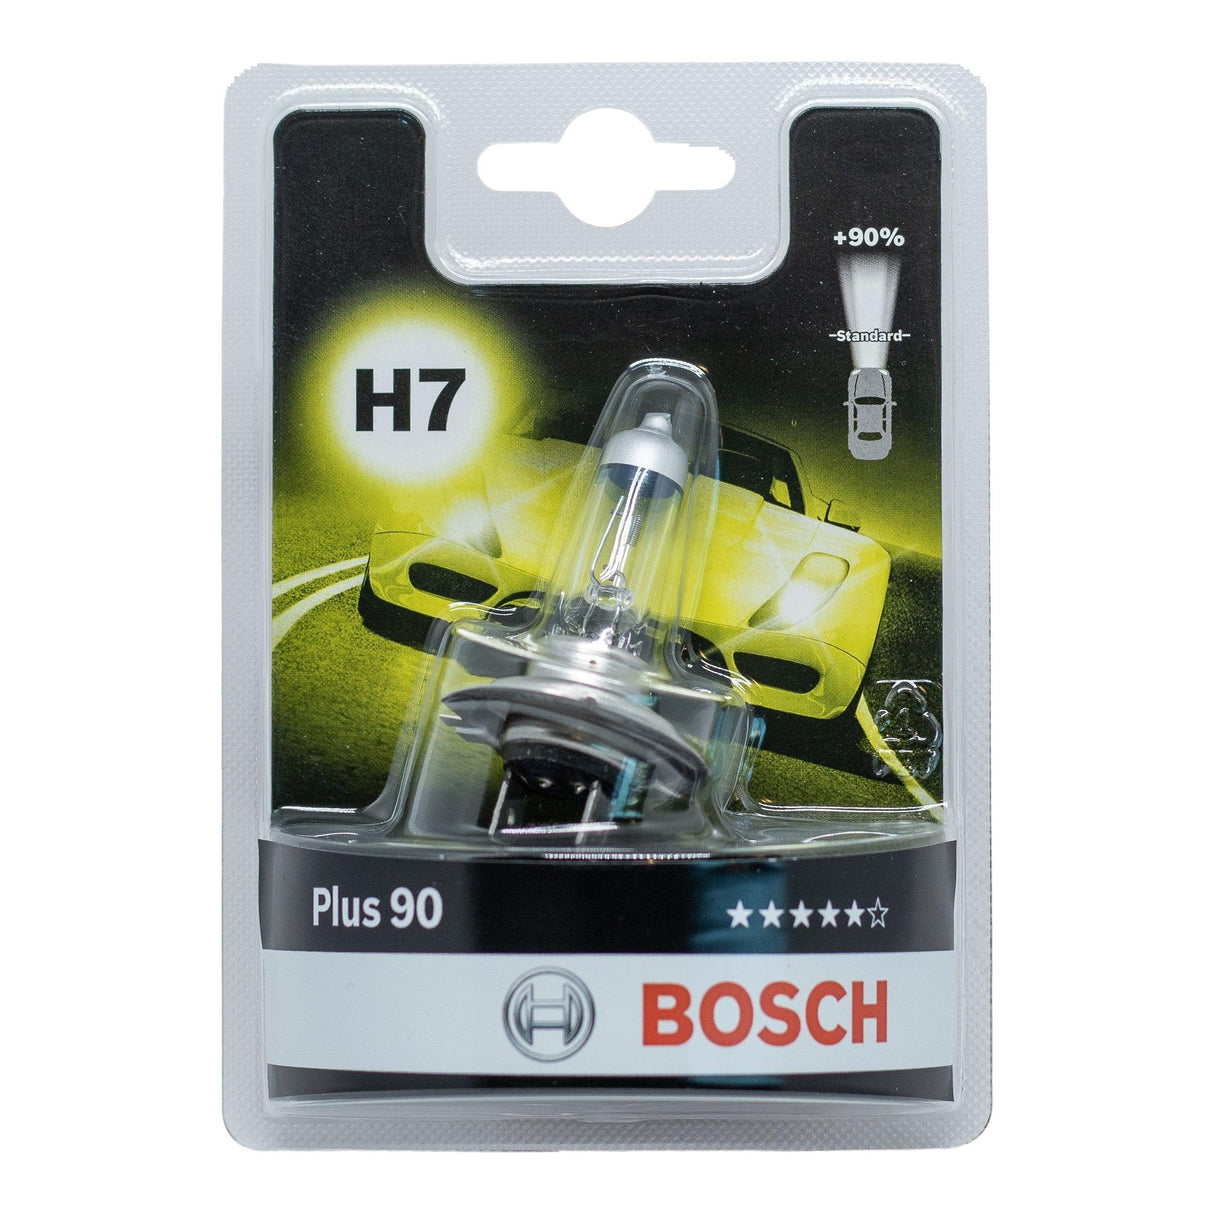 Bosch Plus 90 H7 - Xpert Cleaning